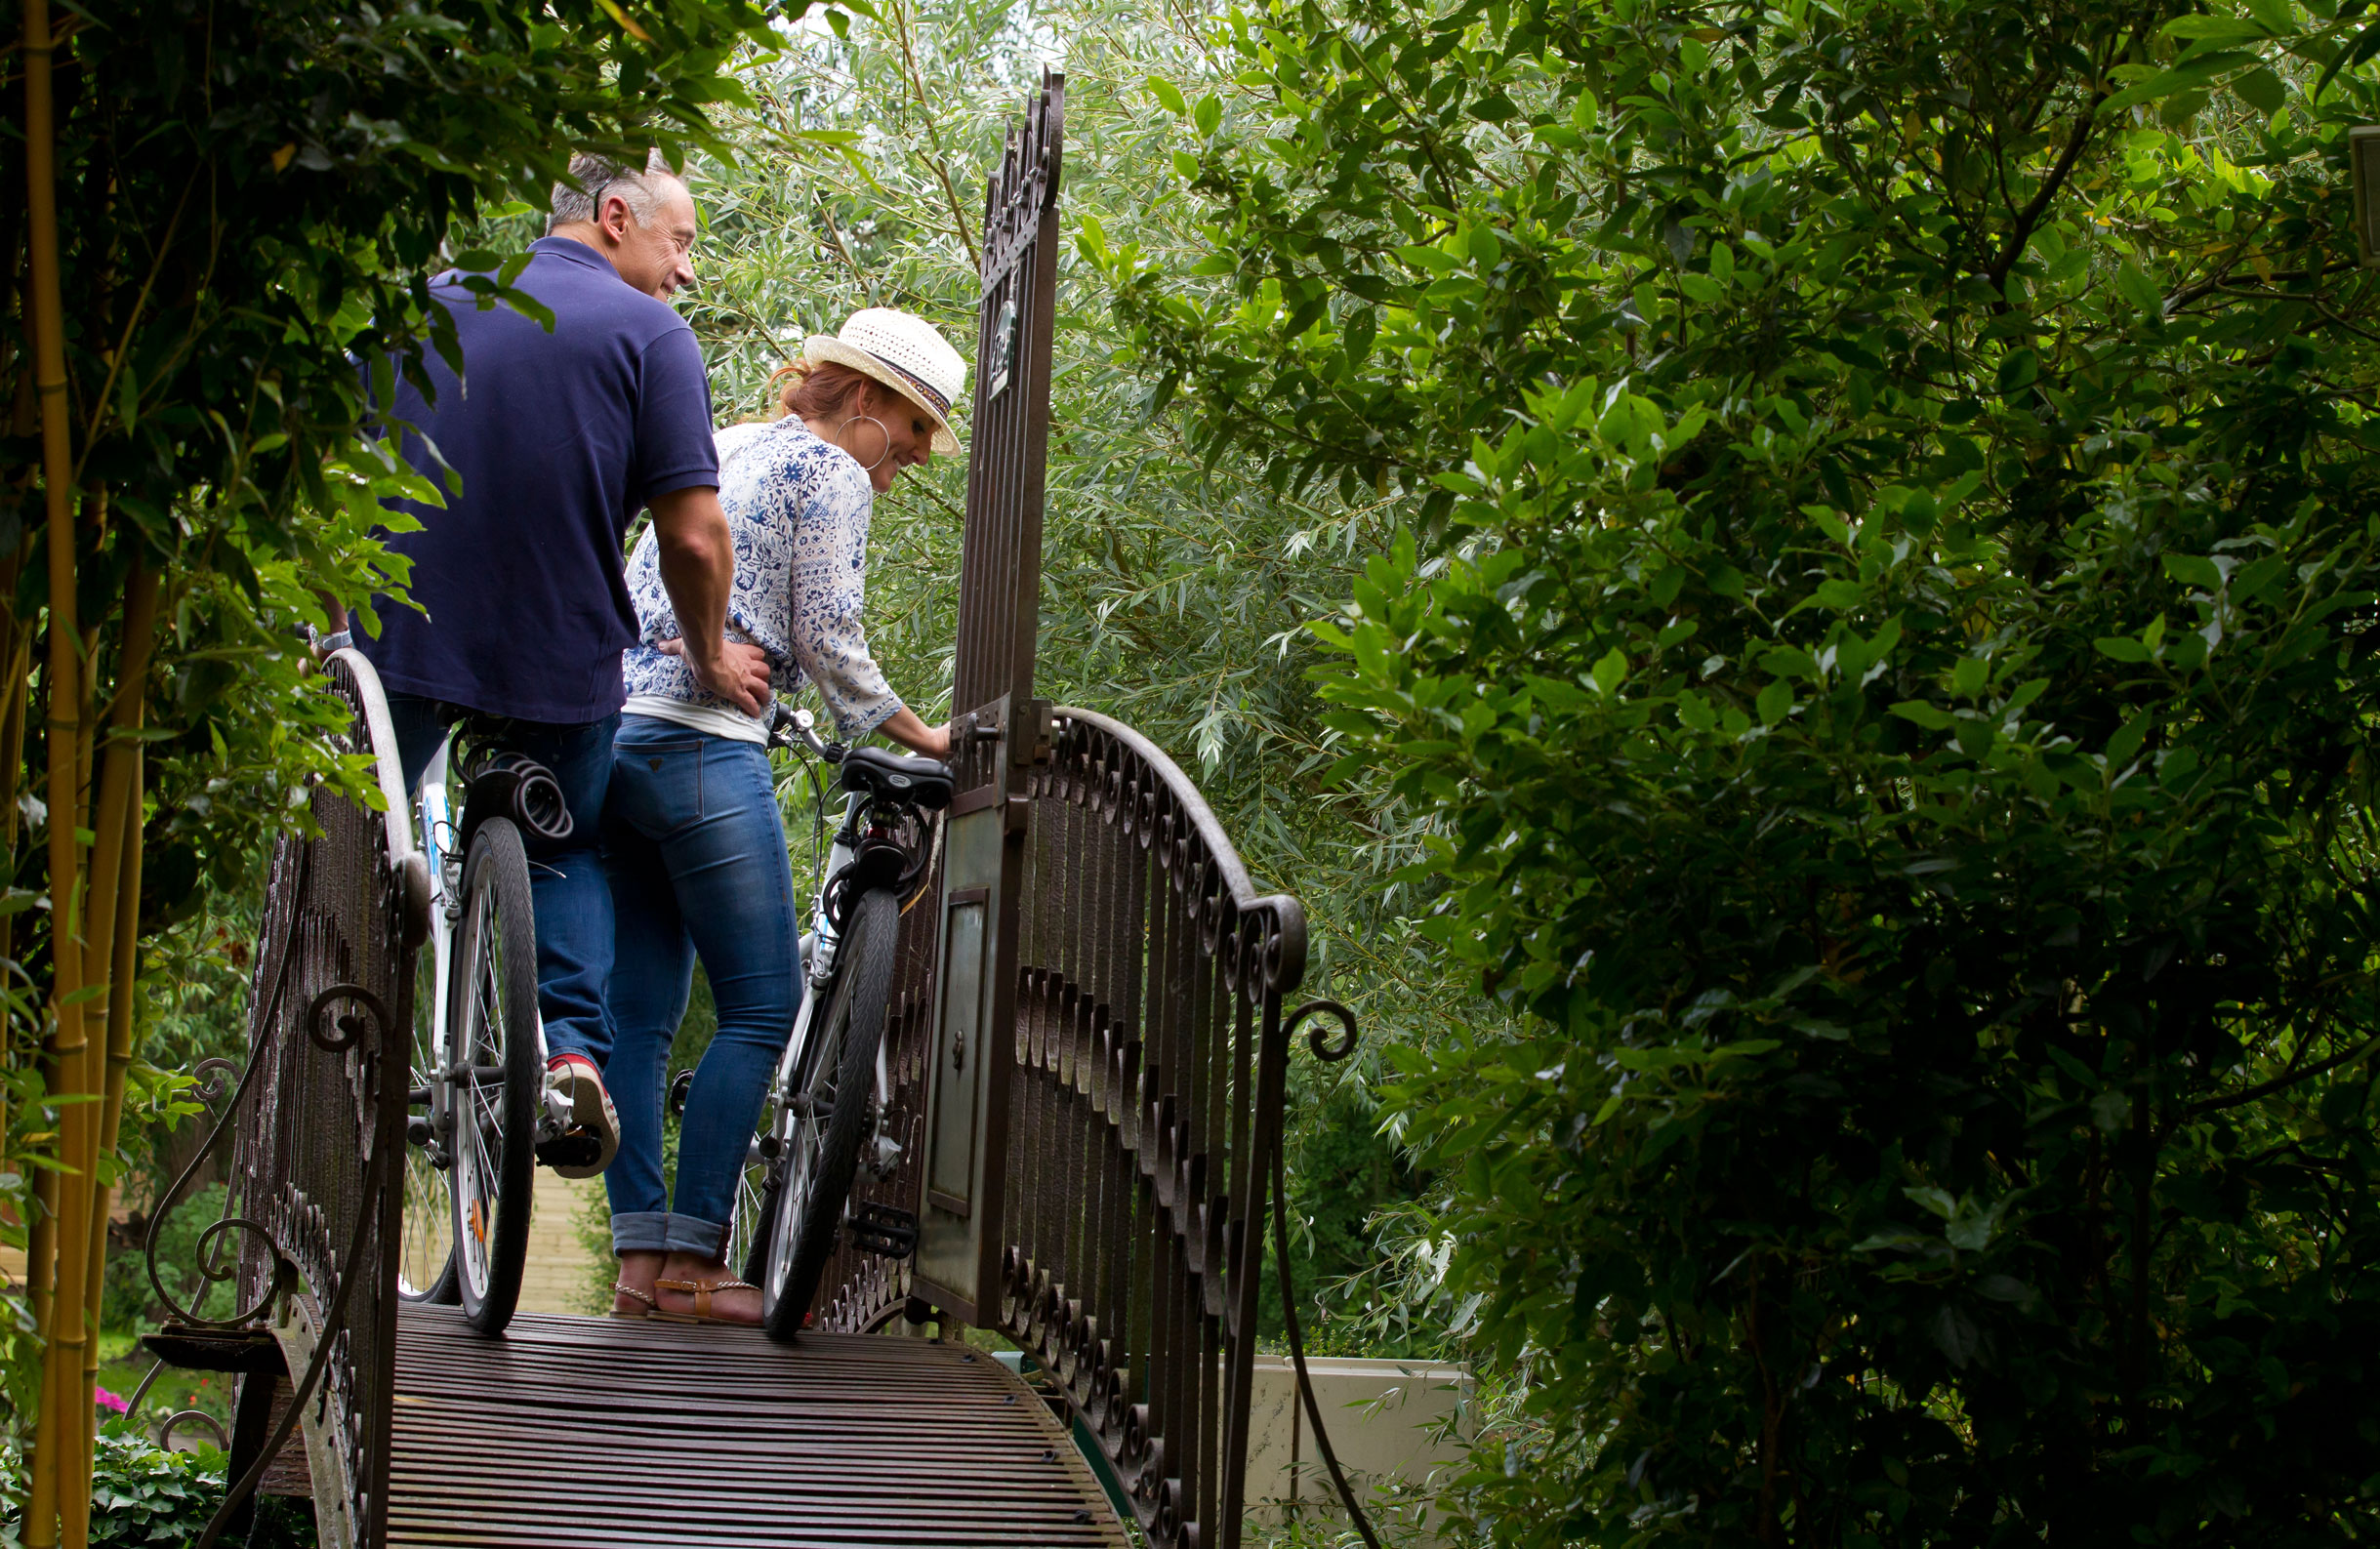 Enjoy a bike ride from your waterside cottage along the towpath to Amiens’ old town – Saint-Leu